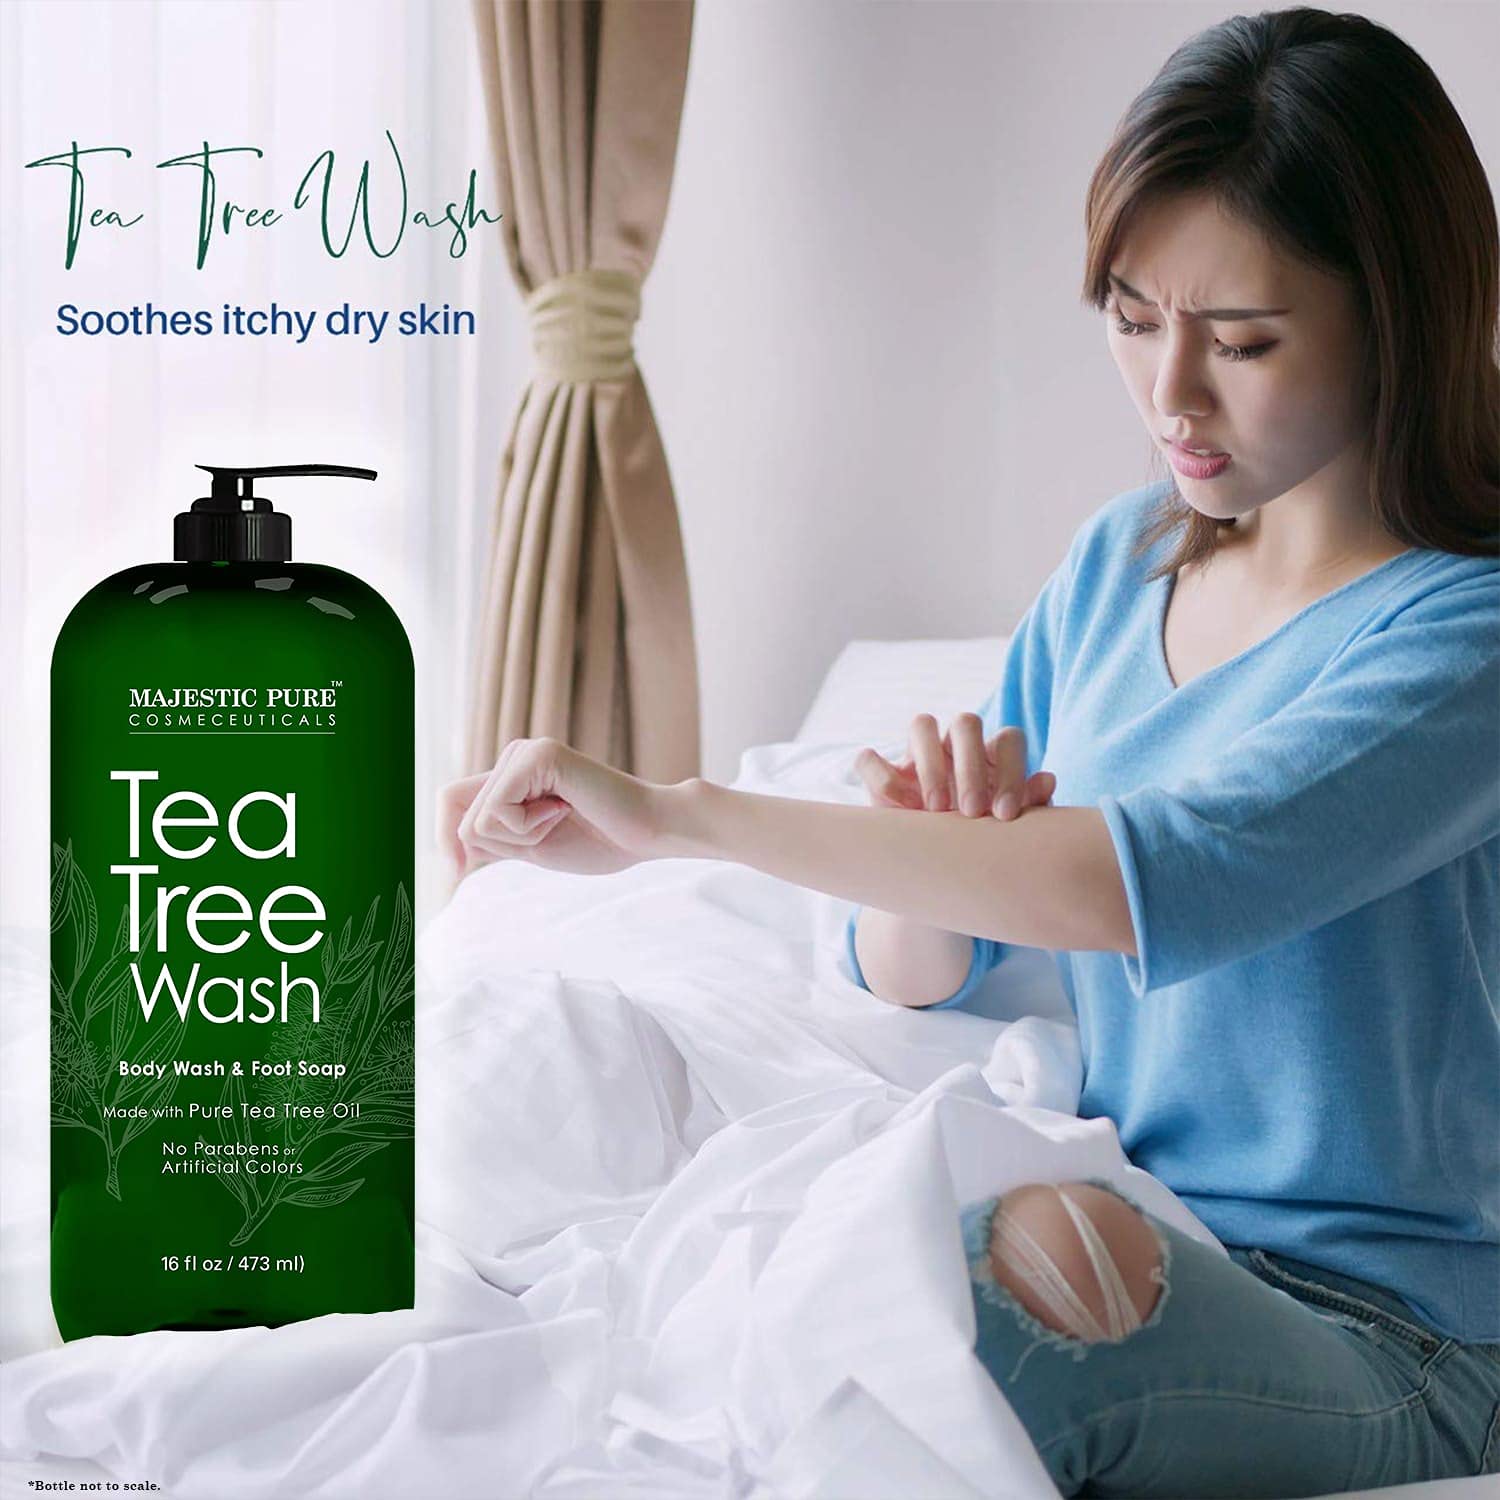 MAJESTIC PURE Tea Tree Body Wash - Formulated to Combat Dry, Flaky Skin - Soothes, Nourishes and Moisturizes Irritated, Chapped, Problem Skin Areas - (Packaging may Vary) -16 fl. oz. : Beauty & Personal Care